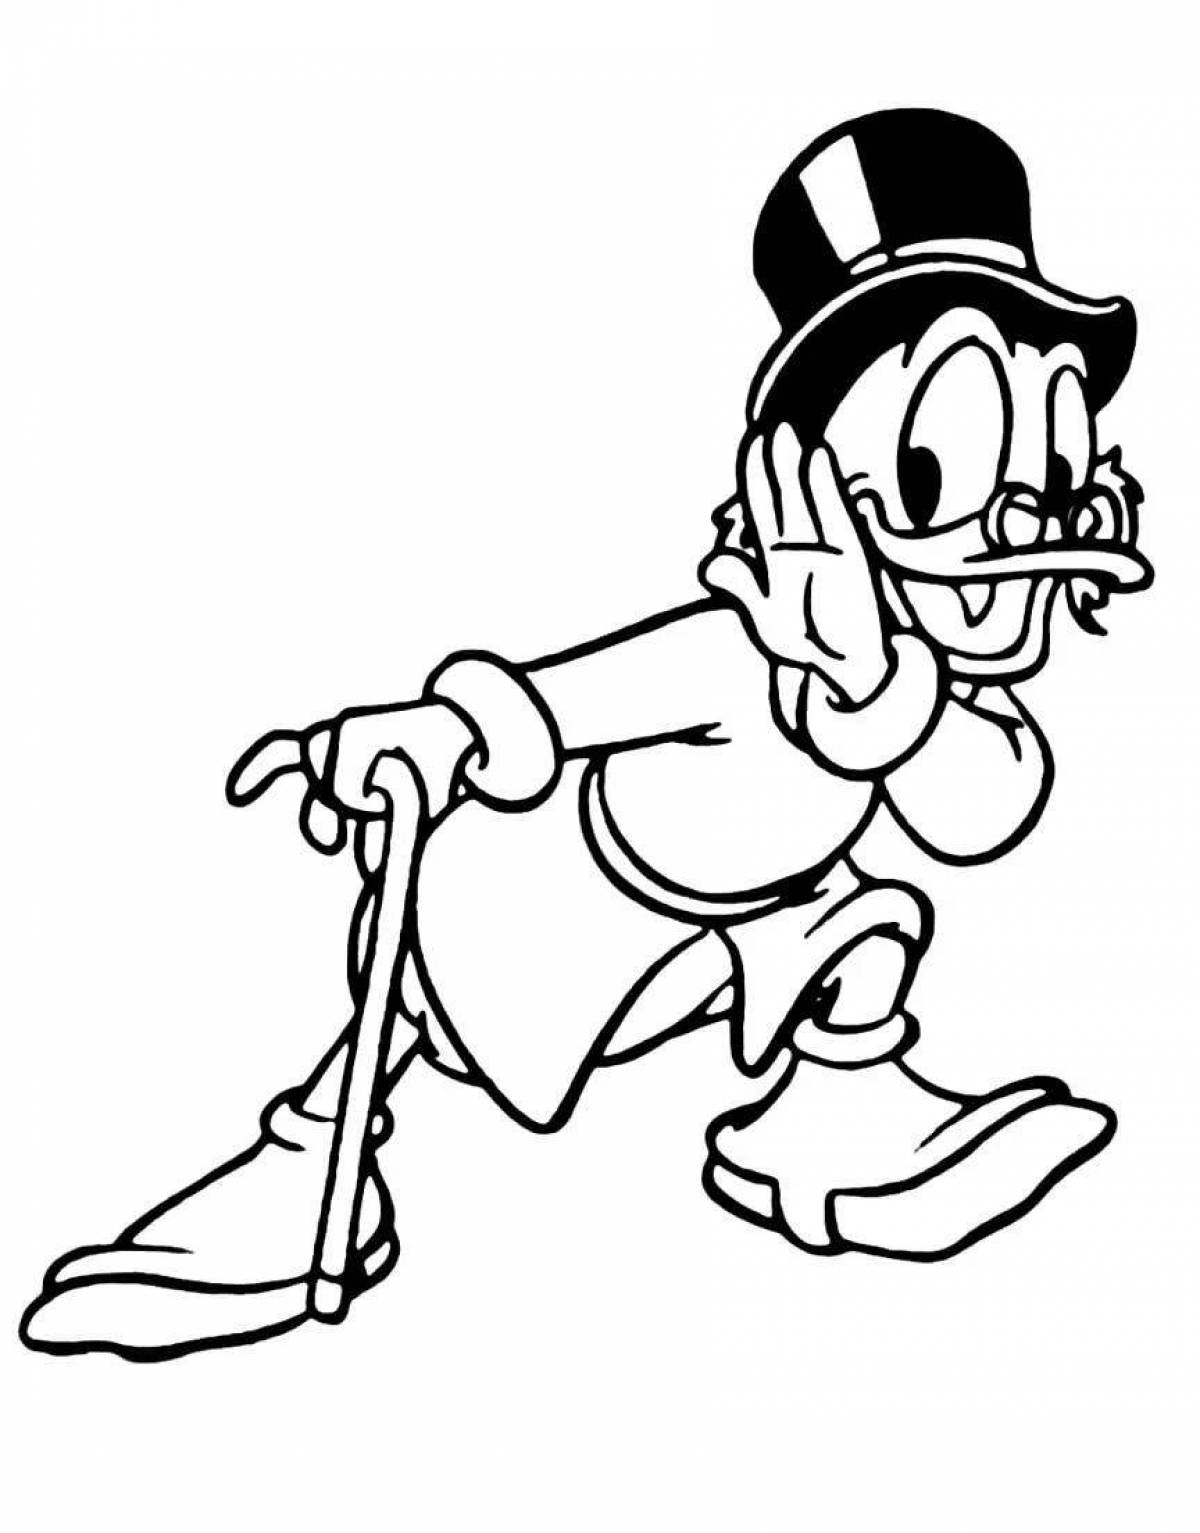 Blessed Scrooge coloring page